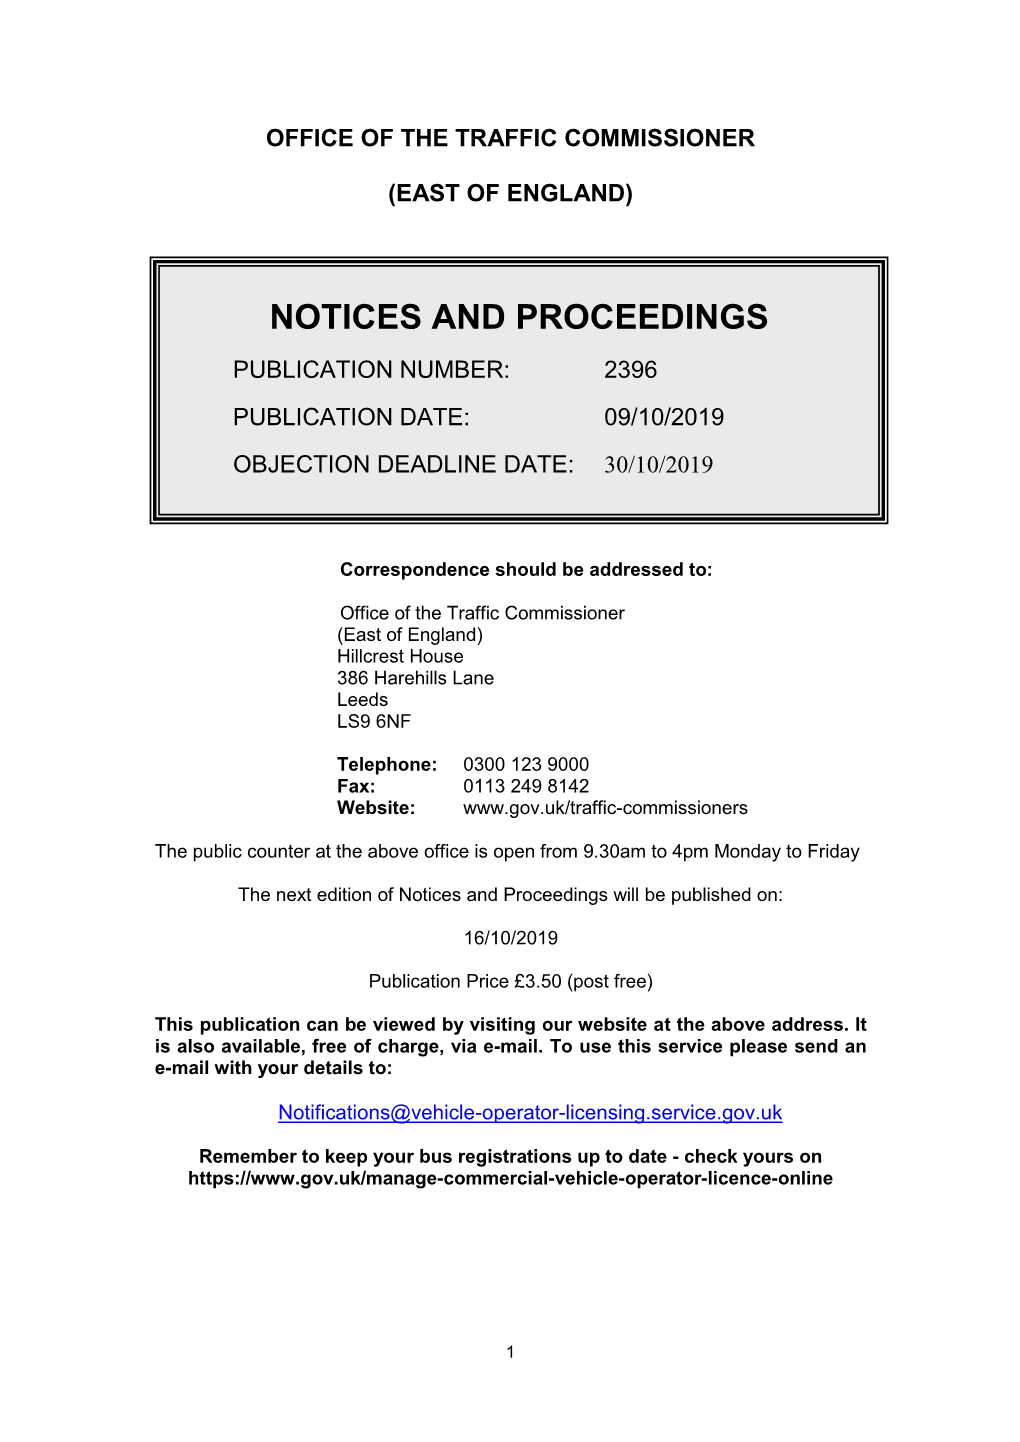 Notices and Proceedings for the East of England